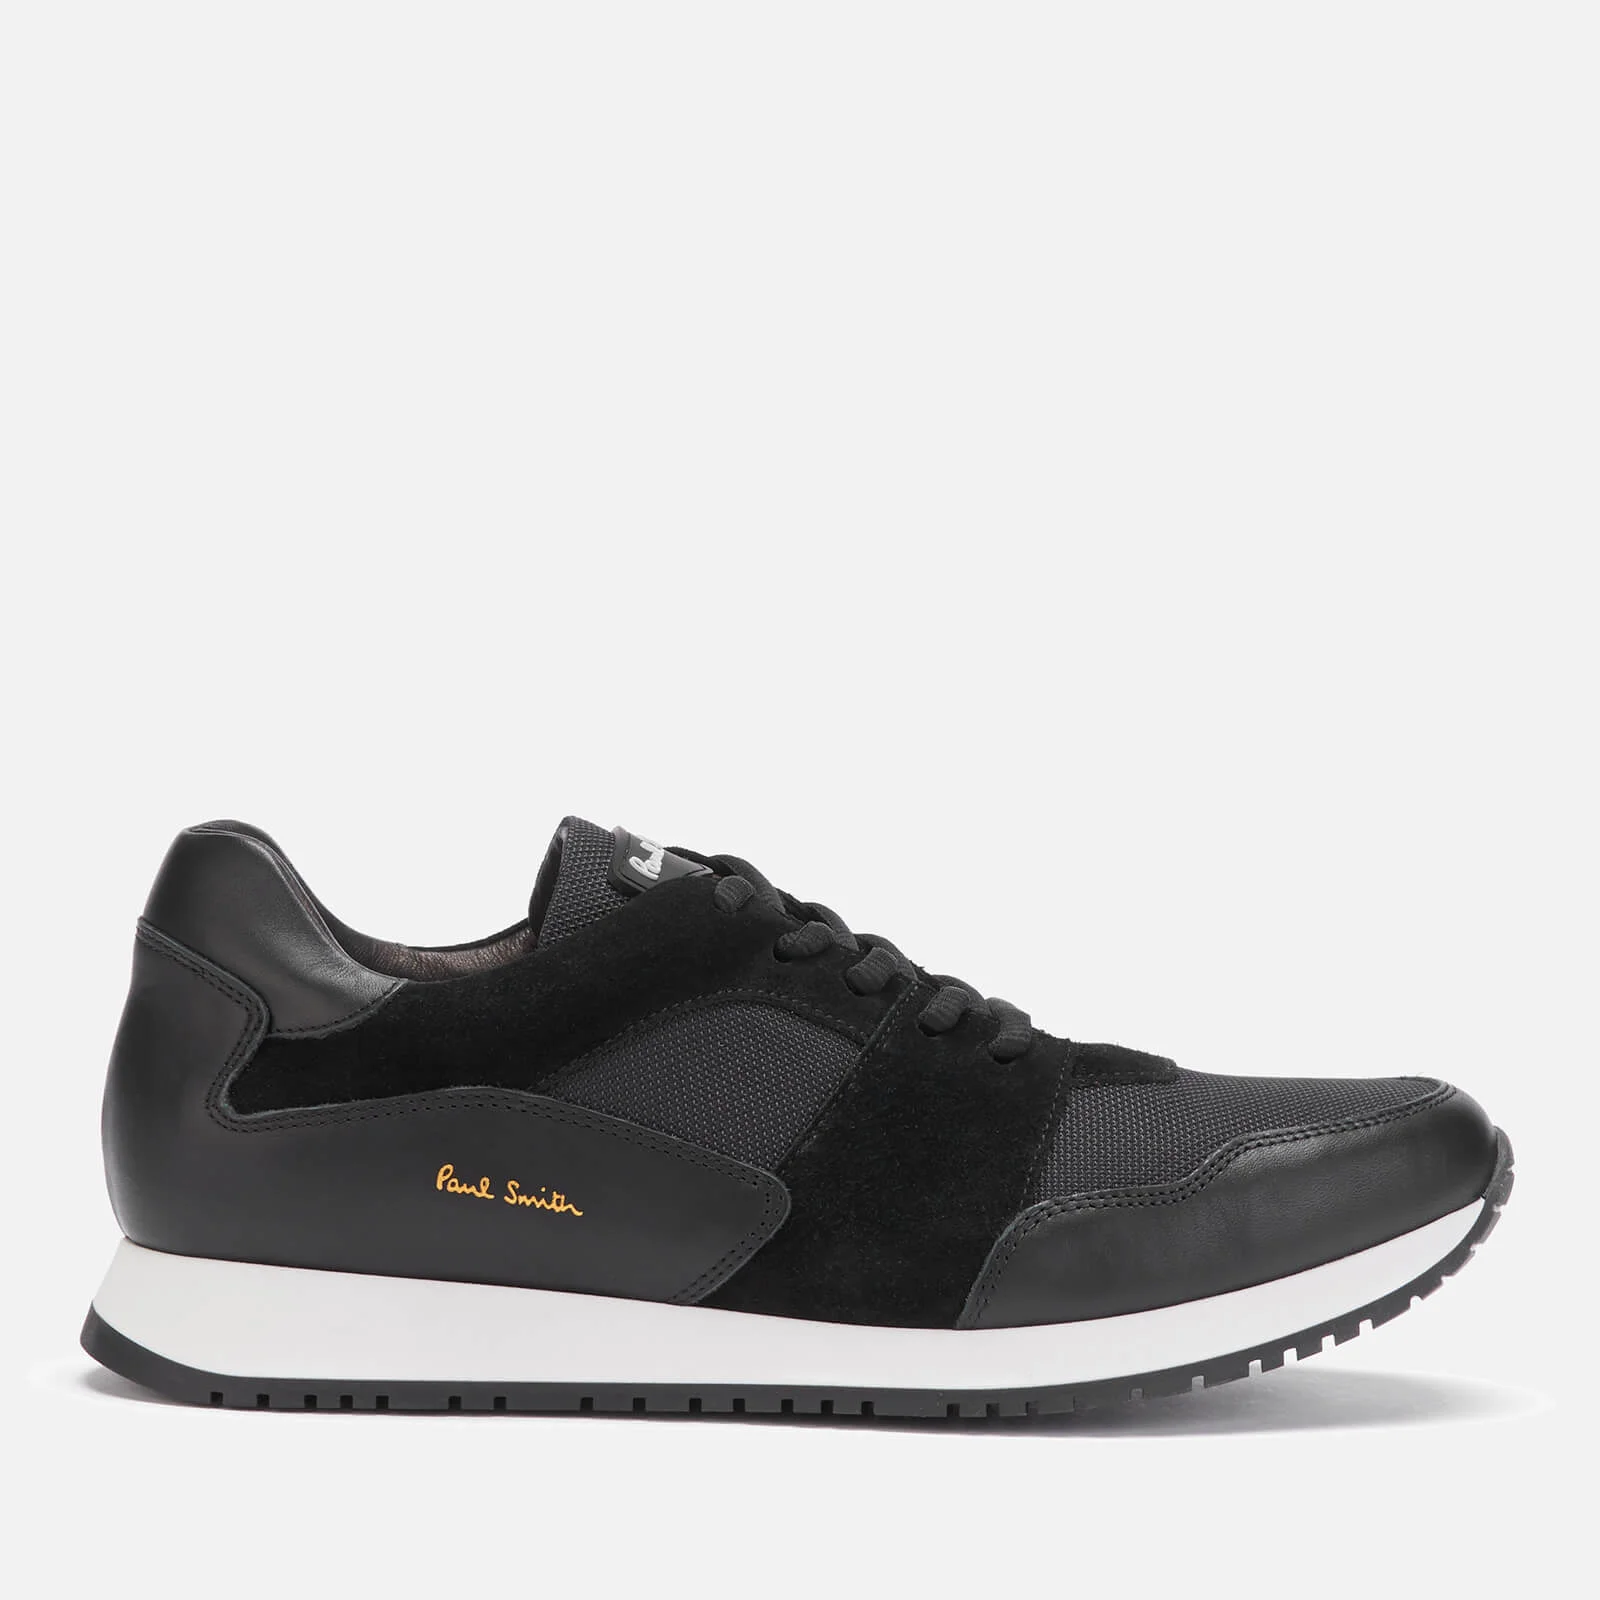 Paul Smith Men's Pioneer Leather Running Style Trainers - Black Image 1